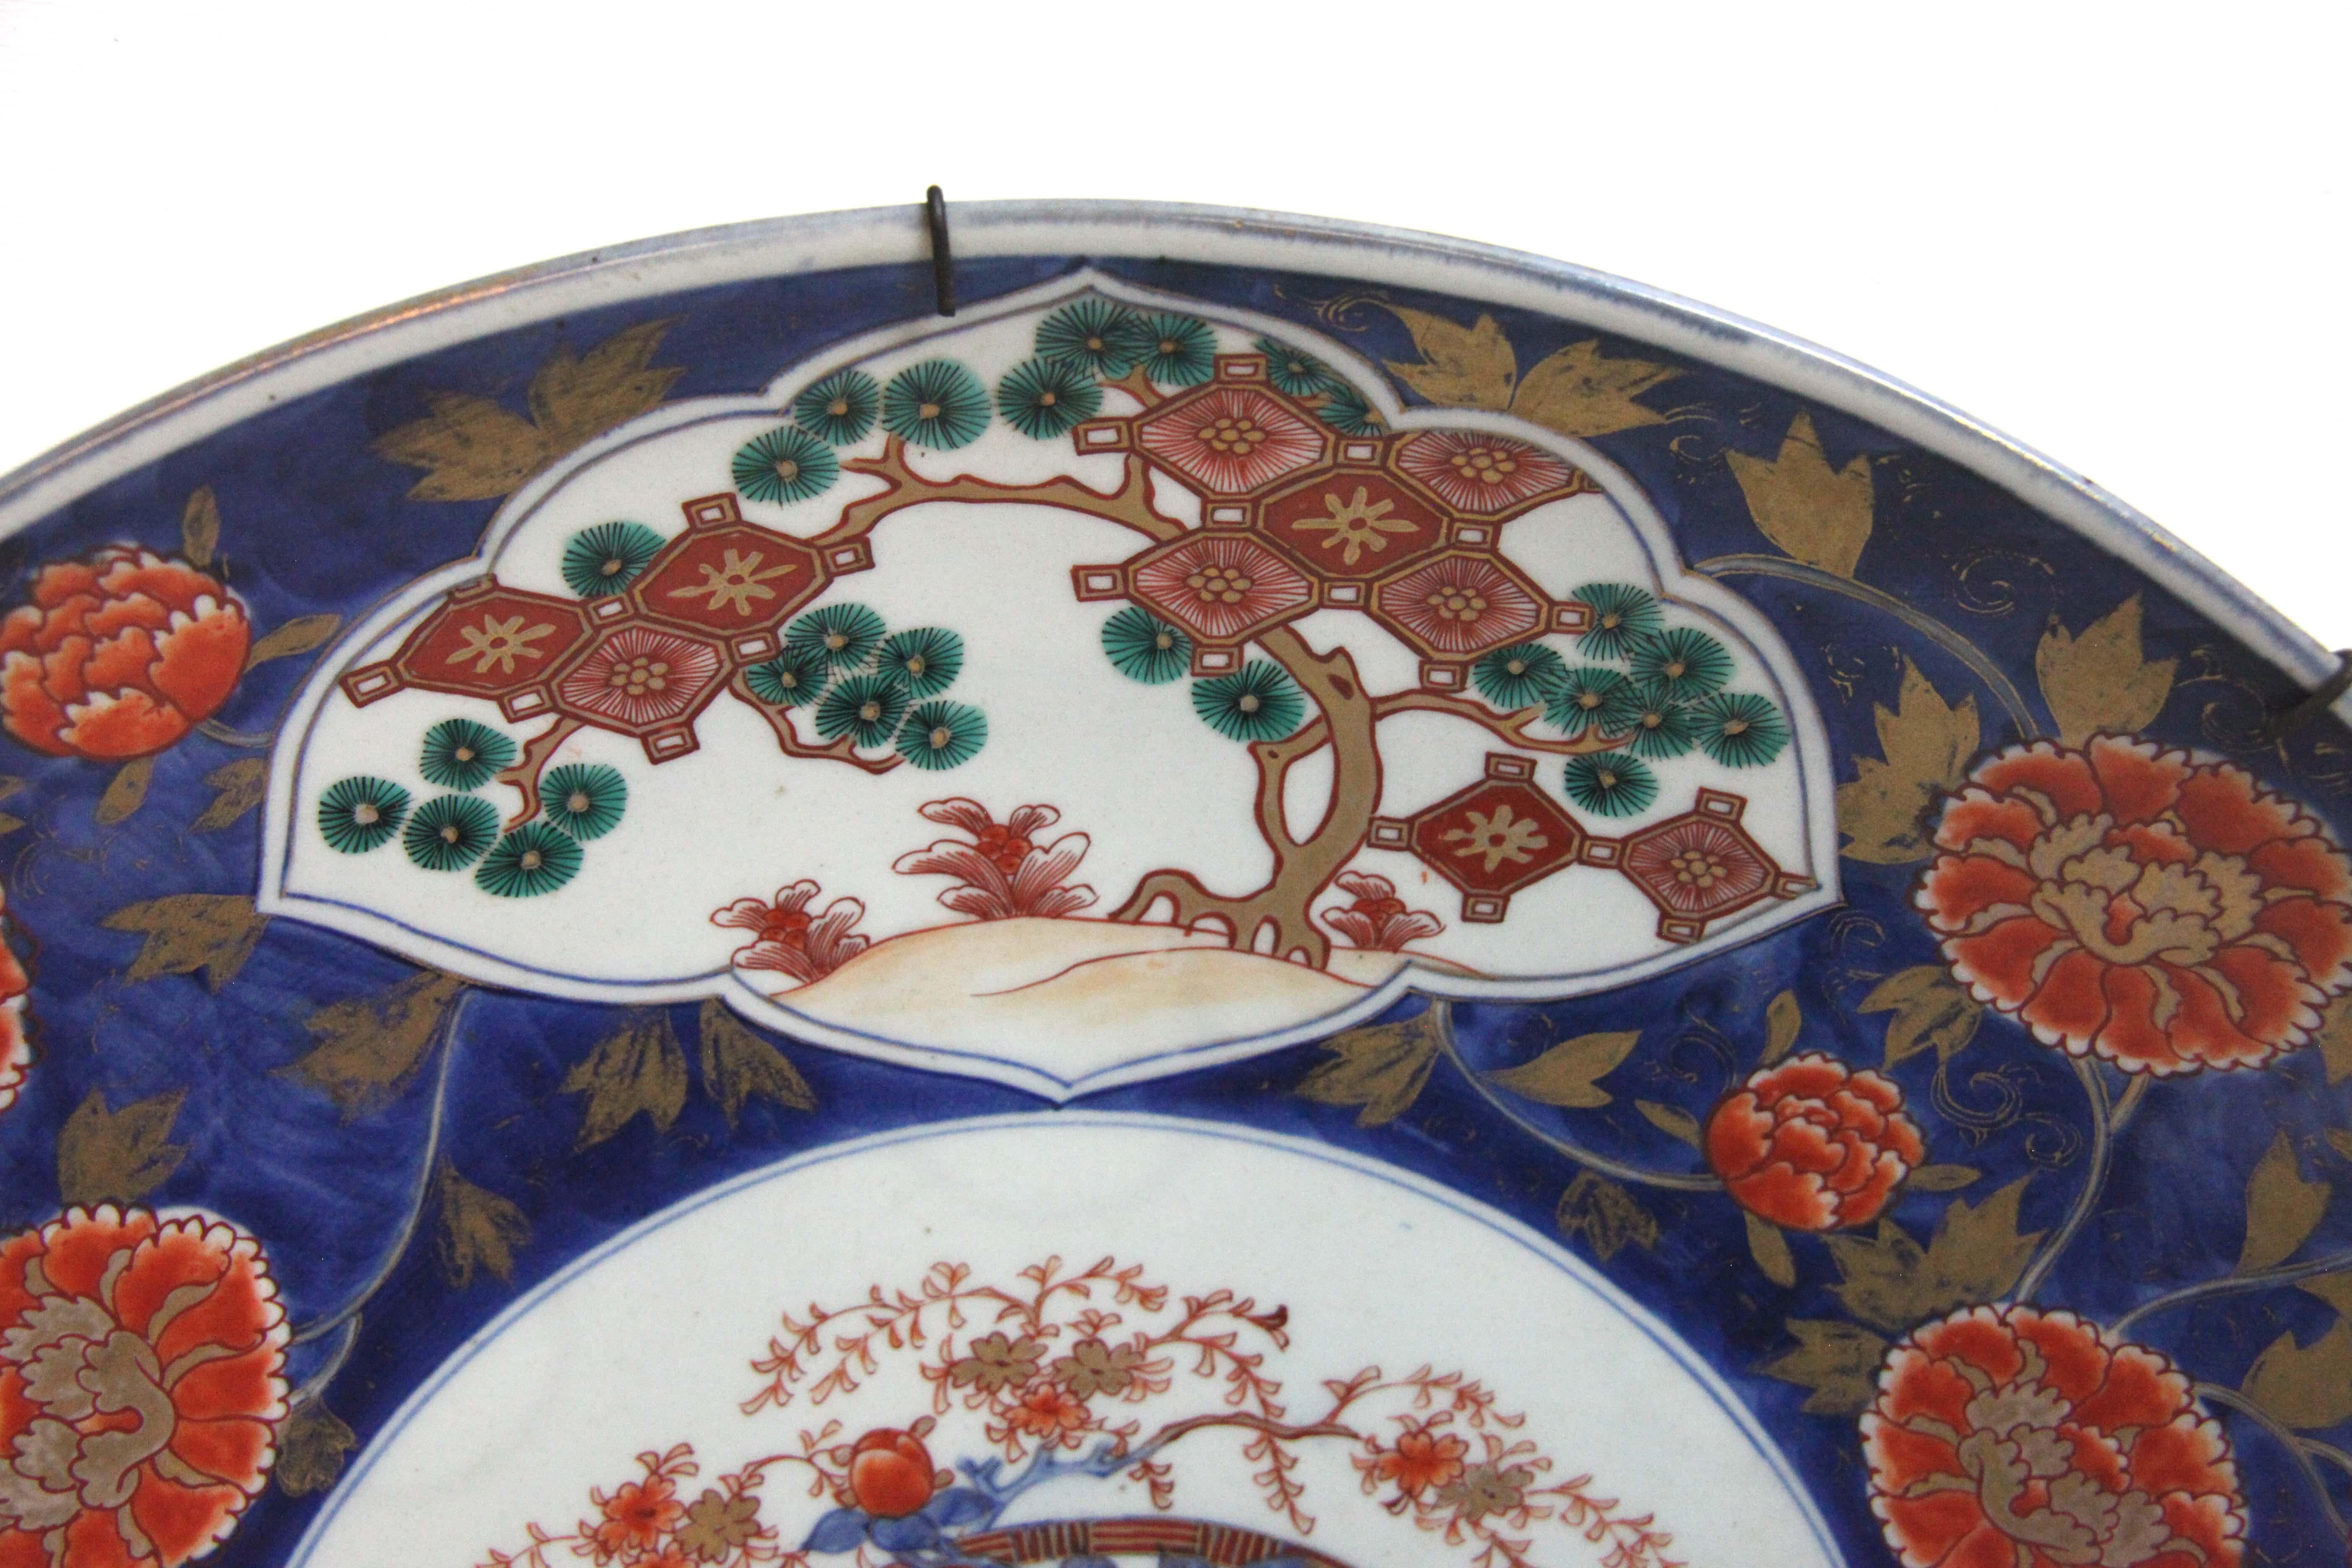 Large 19th century Japanese Imari charger, the central floral basket surrounded by alternating panels of trees and flowers and flowers on a cobalt ground with gilt leaves.